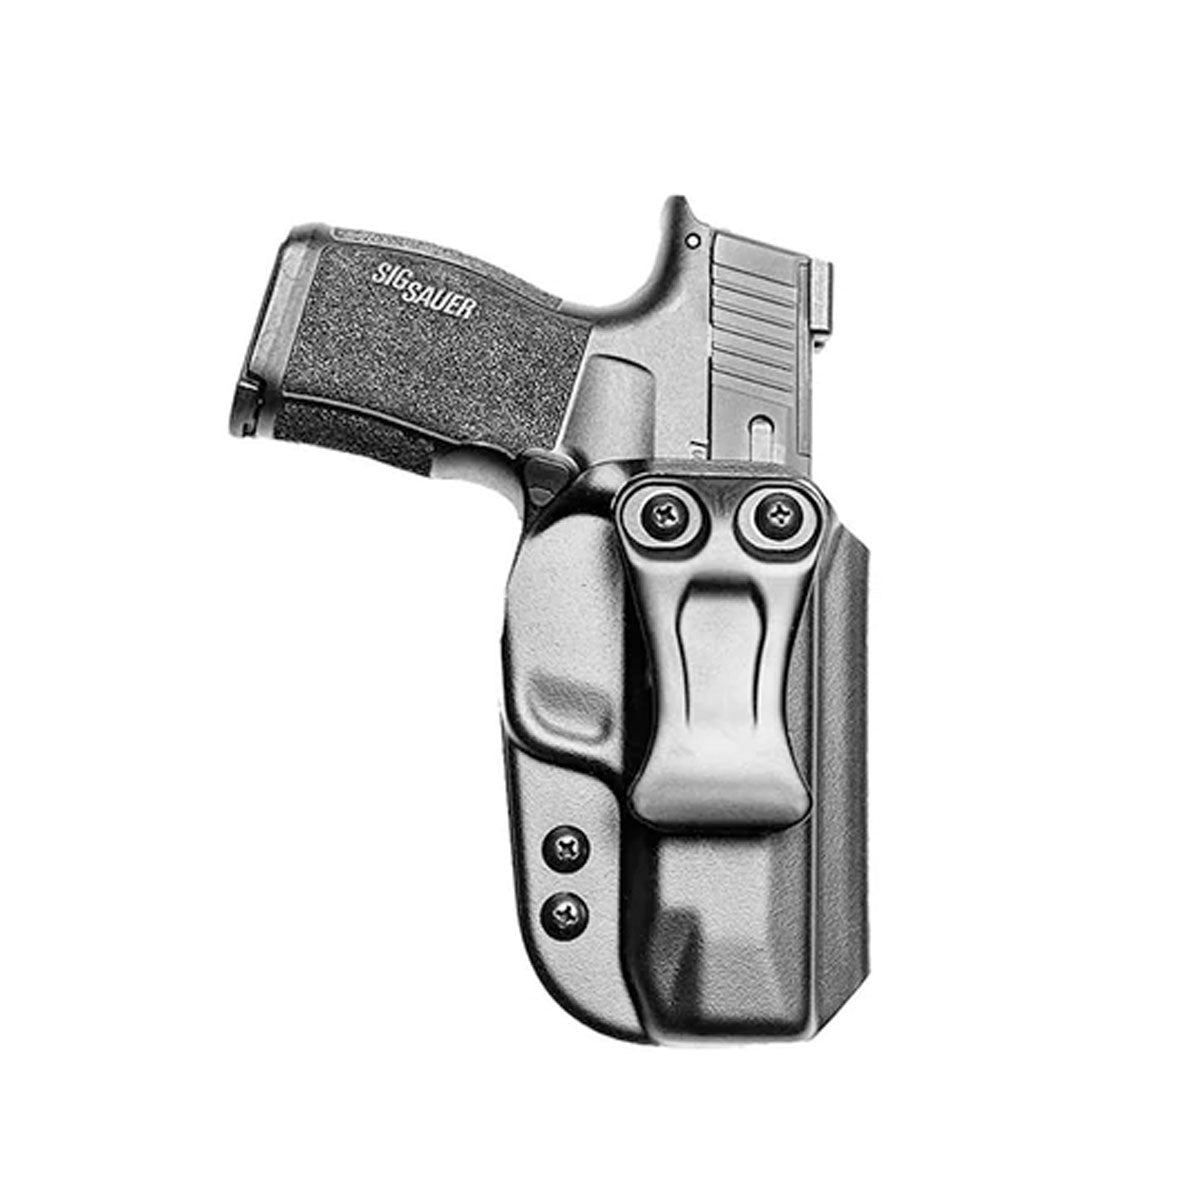 Blade-Tech Nano IWB Holster Black Right Hand Only Holsters Blade-Tech Holsters Sig / P365XL Tactical Gear Supplier Tactical Distributors Australia